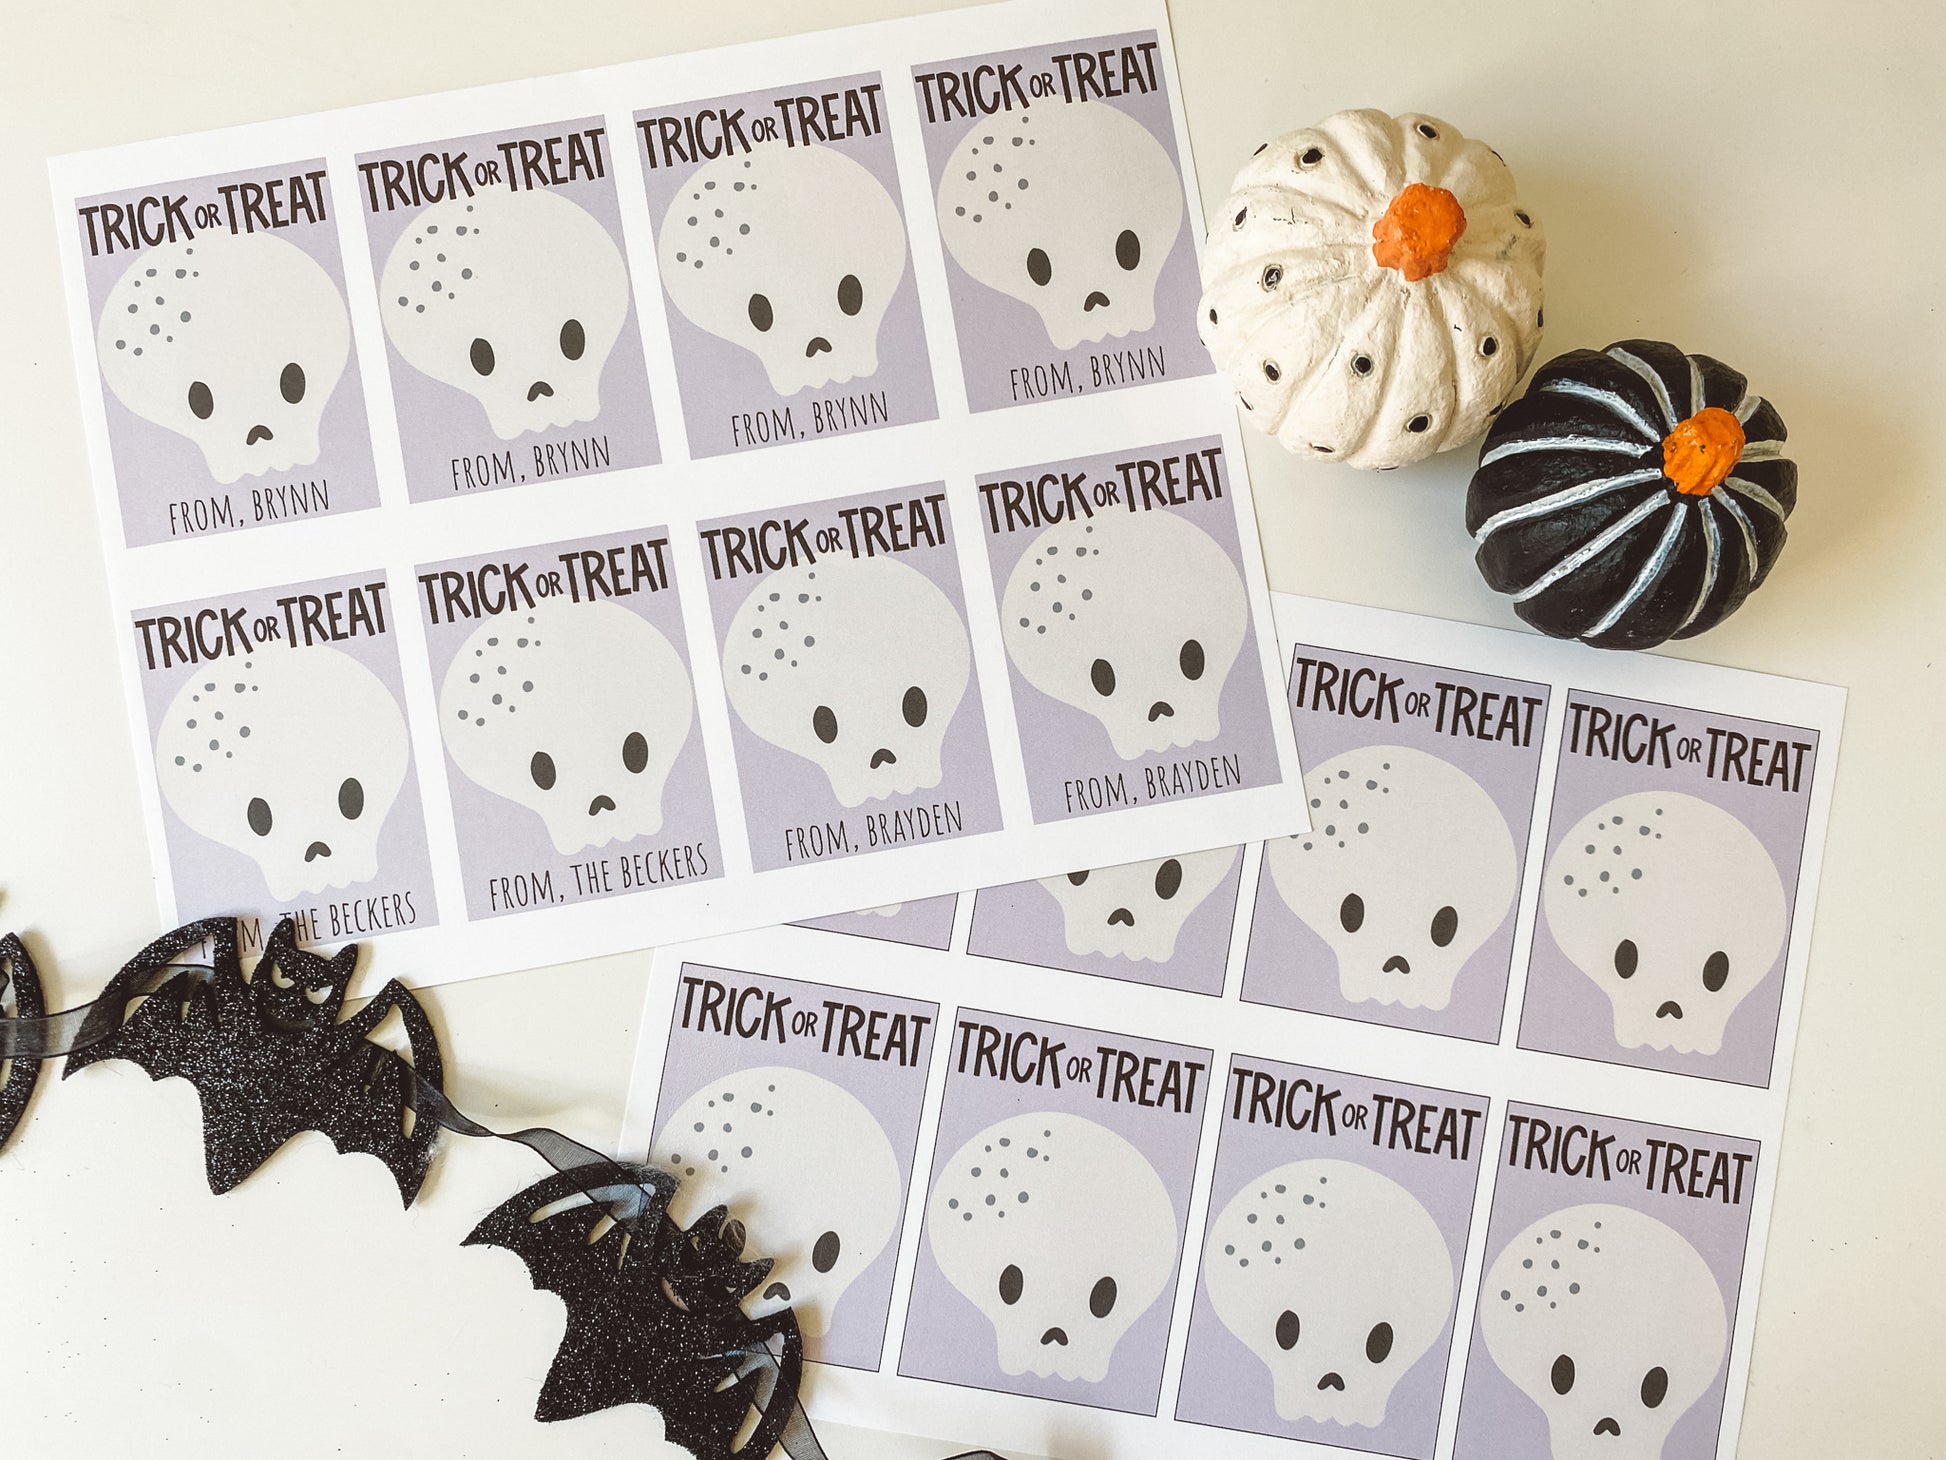 Trick or treat gift tags displayed as they look when printed. 8 tags fit on an 8.5 by 11 inch page. Trick or treat tags have a purple background with cute white skull. Two sheets are displayed. One has the gift giver's name printed and one does not